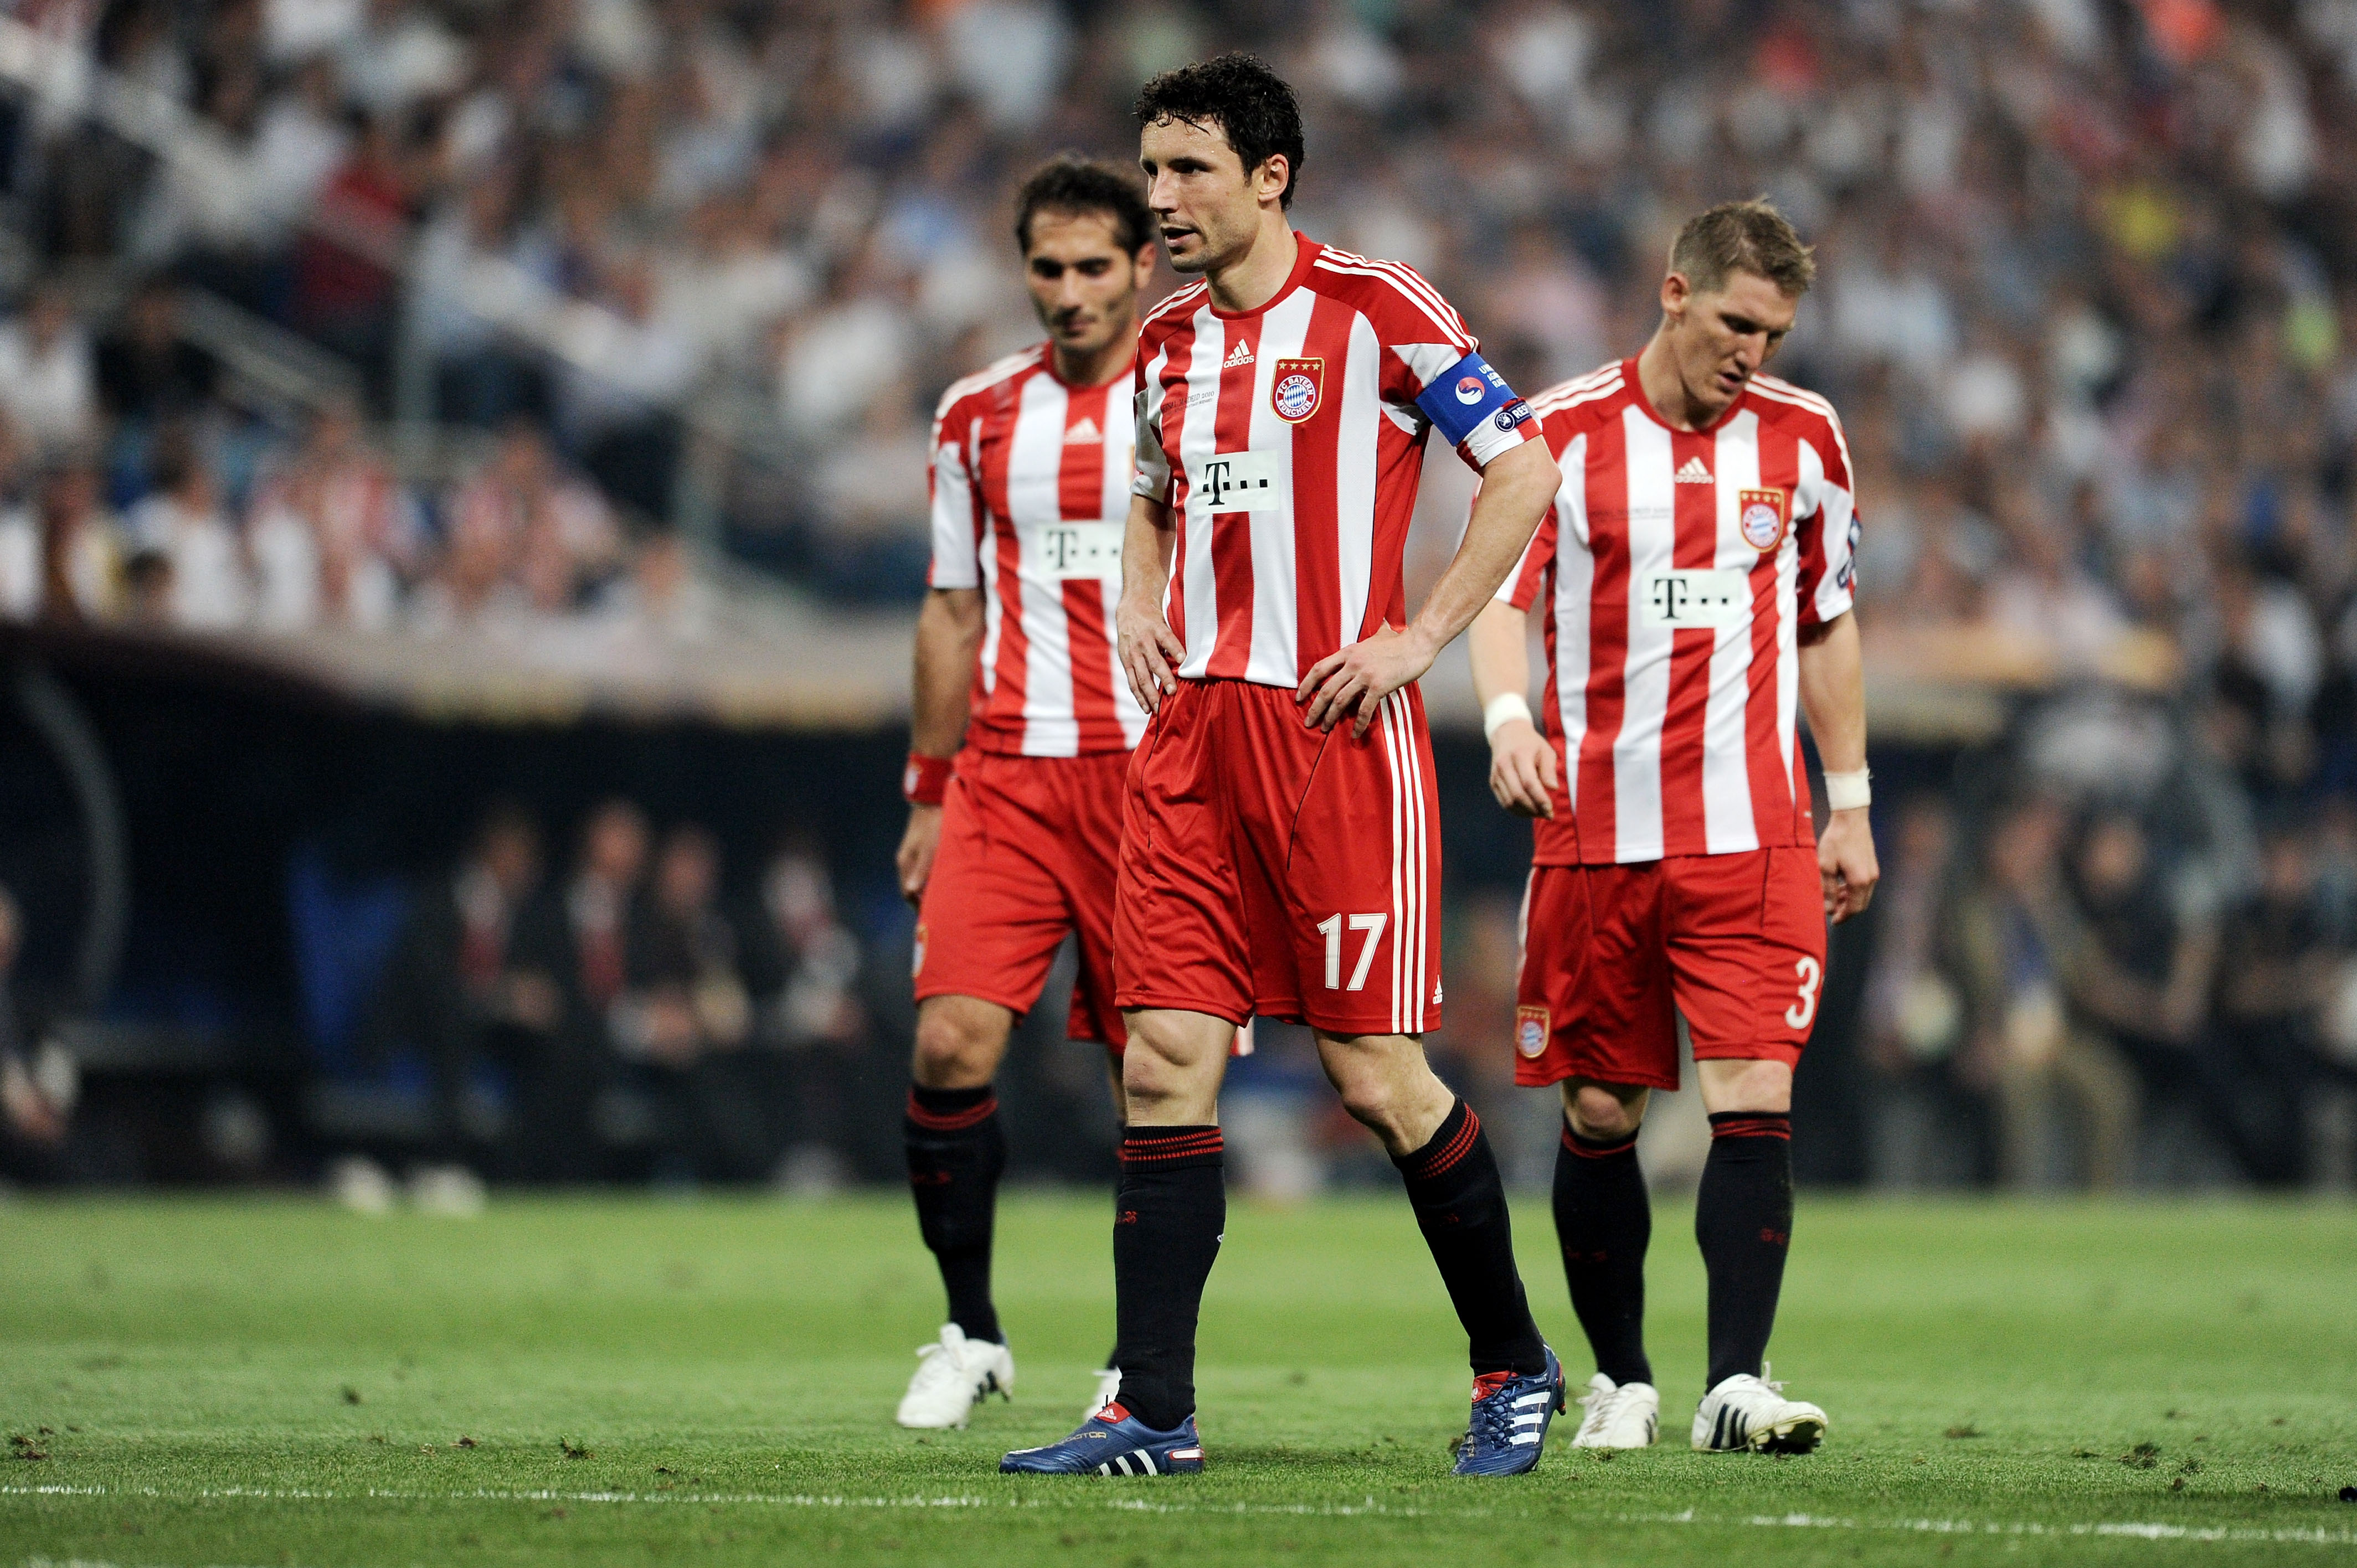 MADRID, SPAIN - MAY 22: Mark van Bommel (C), Bastian Schweinsteiger (R) and Hamit Altintop of Bayern Muenchen react during the UEFA Champions League Final match between FC Bayern Muenchen and Inter Milan at the Estadio Santiago Bernabeu on May 22, 2010 in